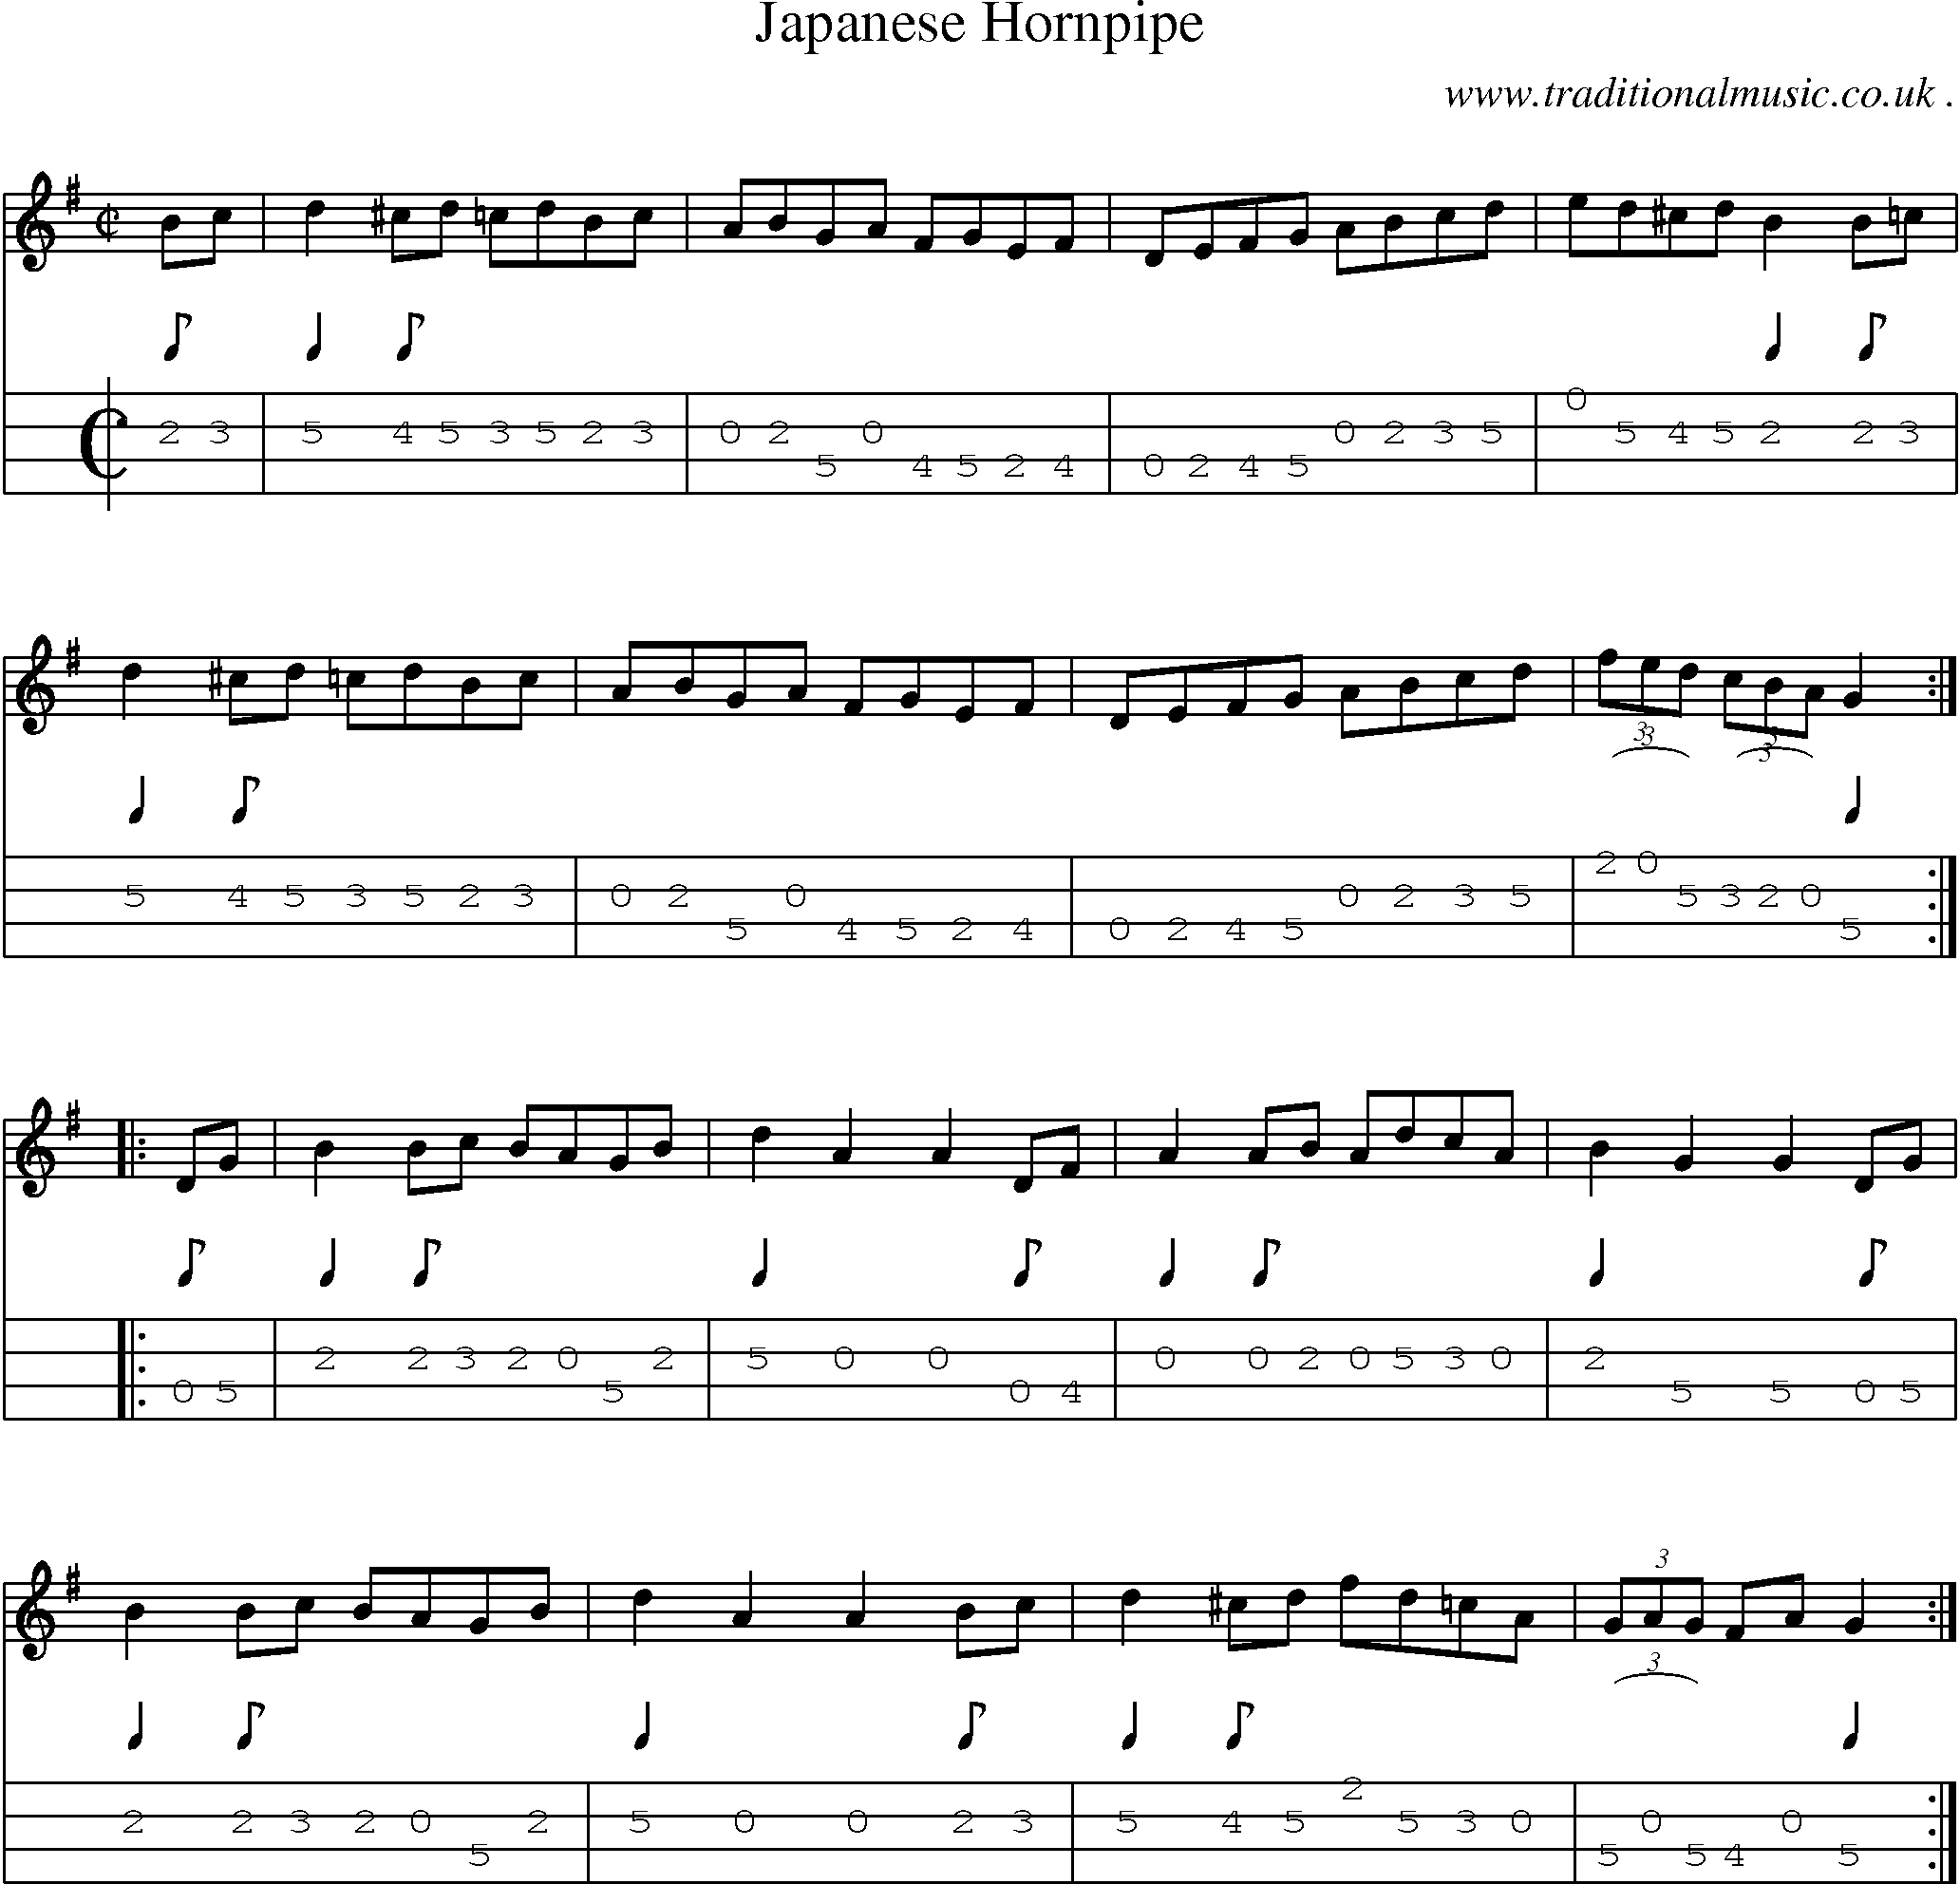 Sheet-Music and Mandolin Tabs for Japanese Hornpipe